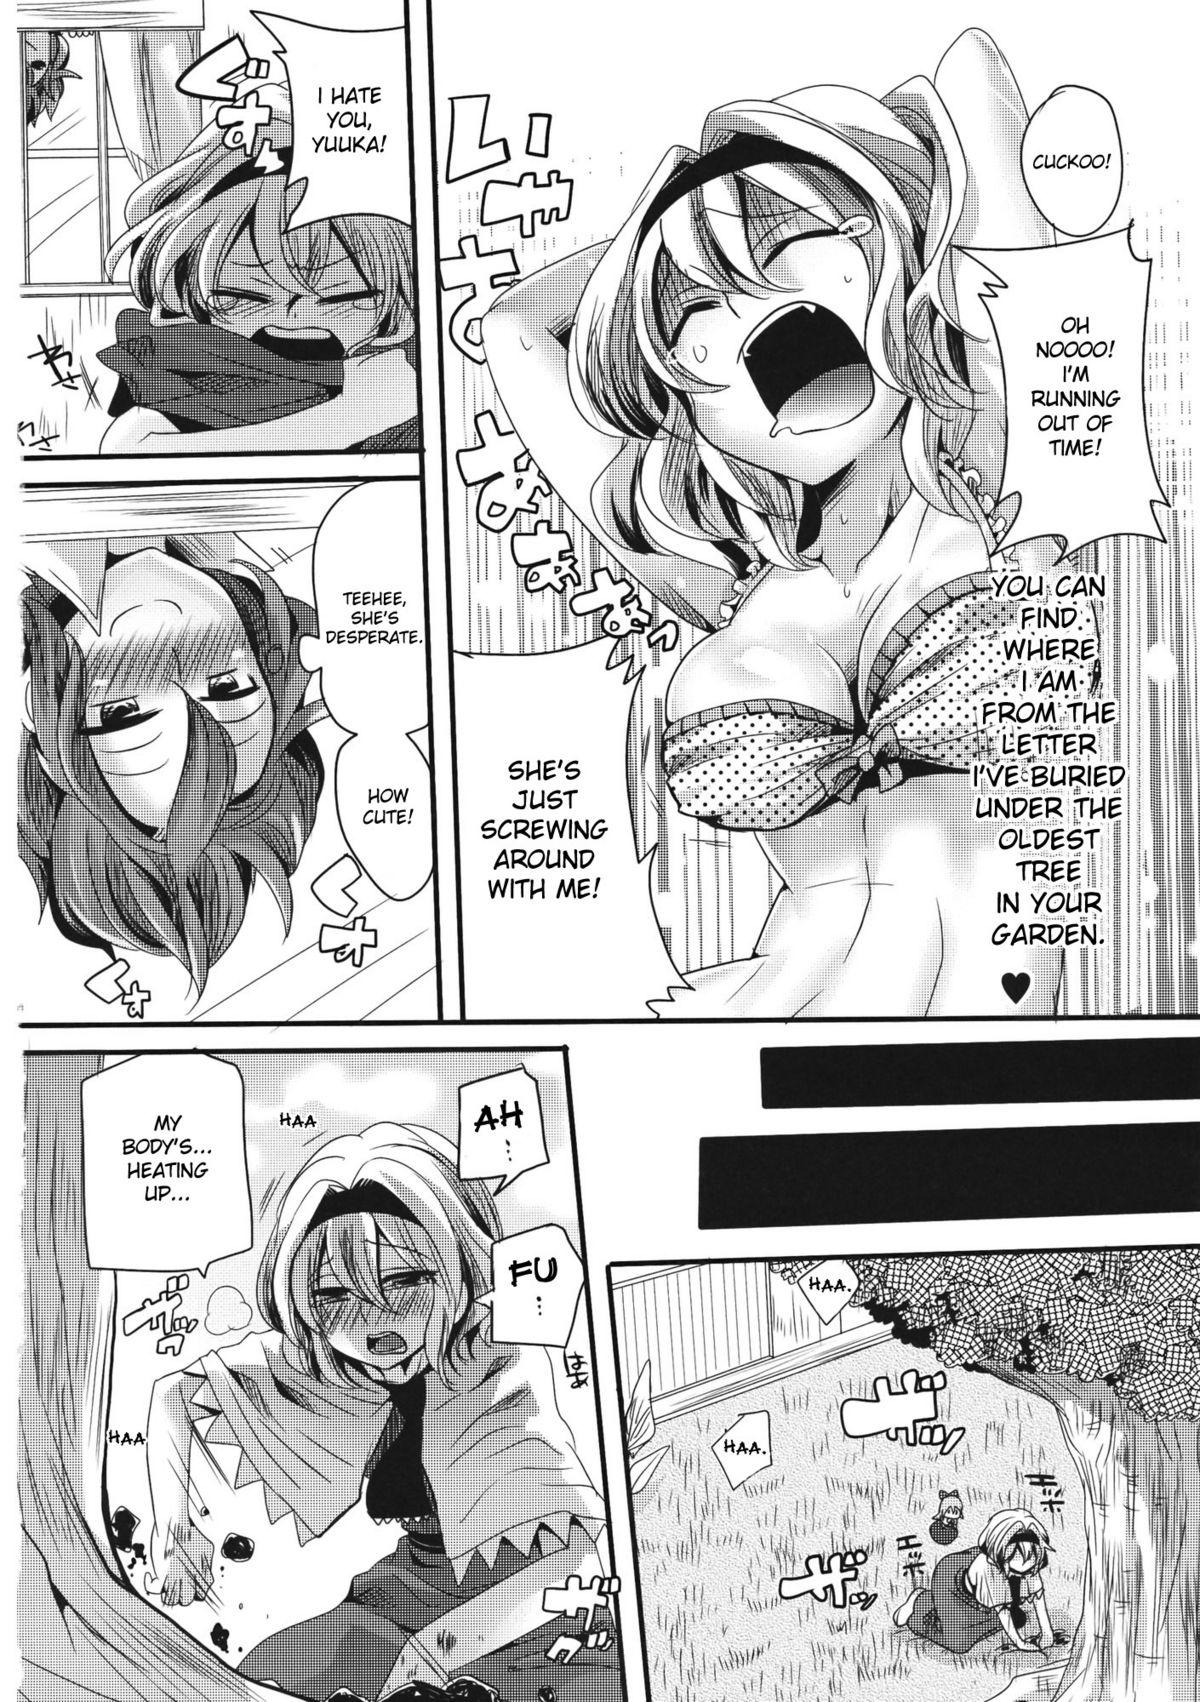 Nut Yuuka ga do S de Alice ga M de | Yuuka is a Sadist, While Alice is a Masochist - Touhou project Whore - Page 5